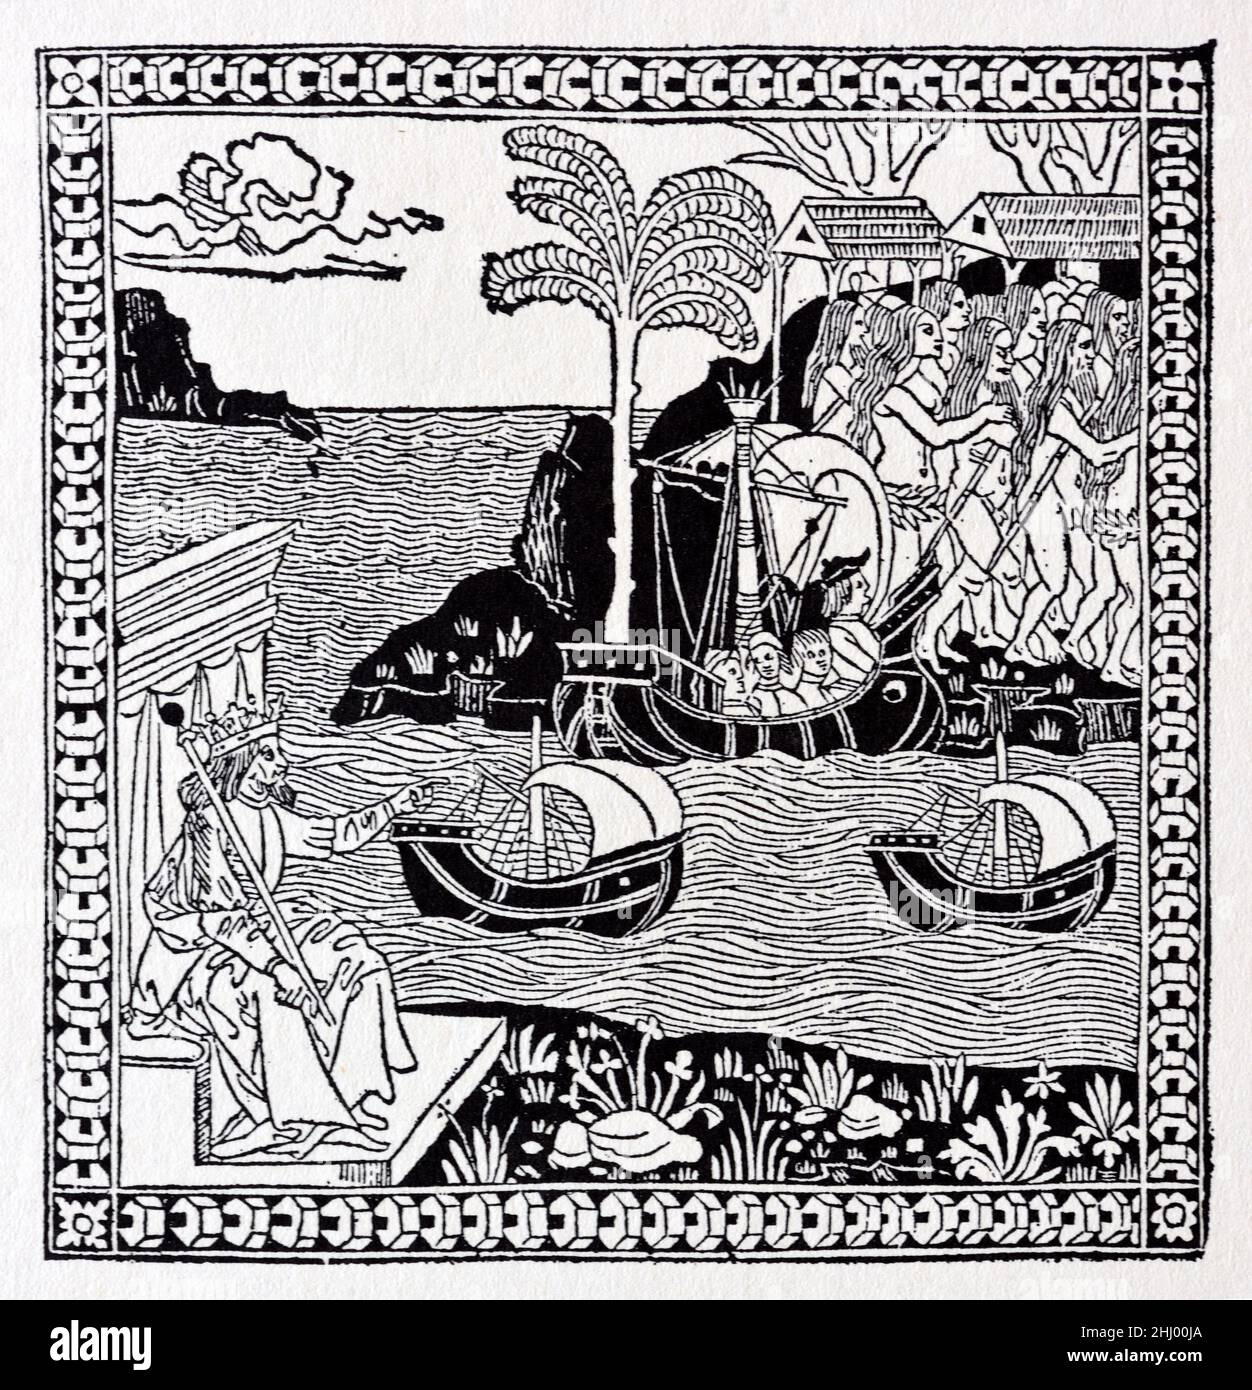 Woodcut of 1493 Showing Arrival of Christopher Columbus in the Cabribbean, the West Indies, the Americas or New World in1492. The illustration shows the Spanish King Ferdinand II of Aragon seated on his throne to bottom left. Vintage Woodcut Print, Engraving or Illustration Stock Photo